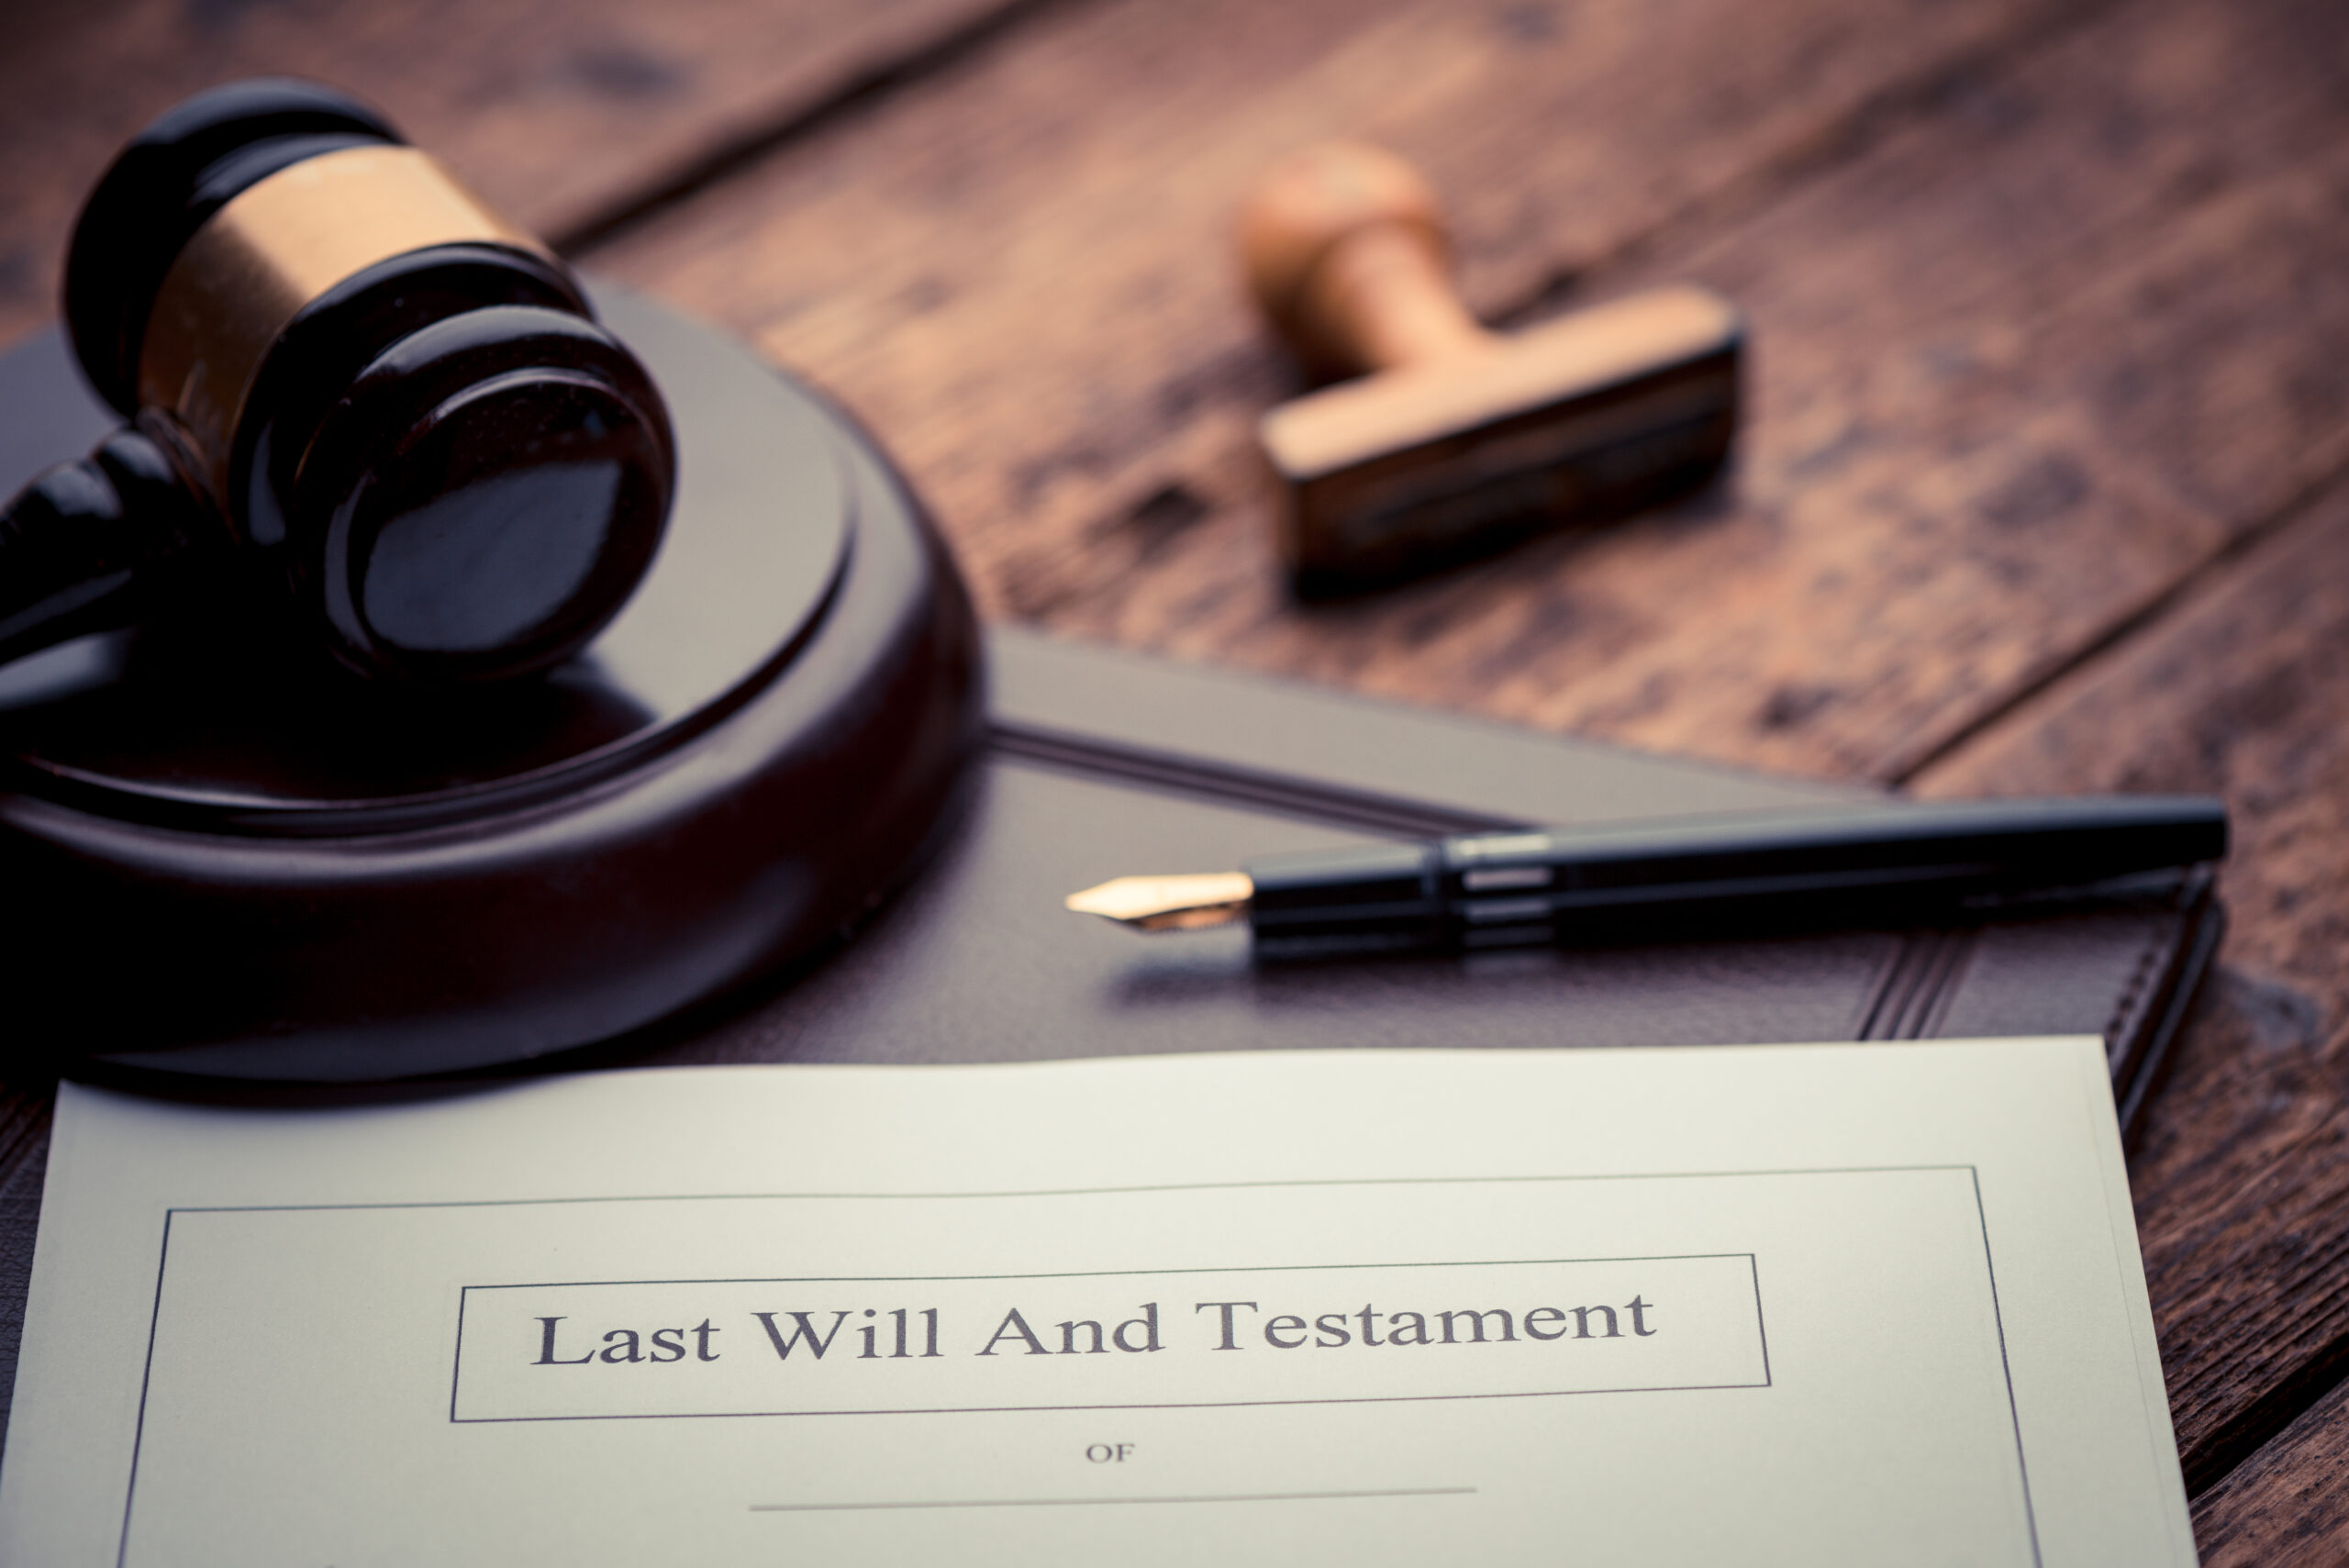 No one should have to go through the probate legal process alone. Hire an experienced Reno Probate Attorney that can help you through a stressful and emotional process.